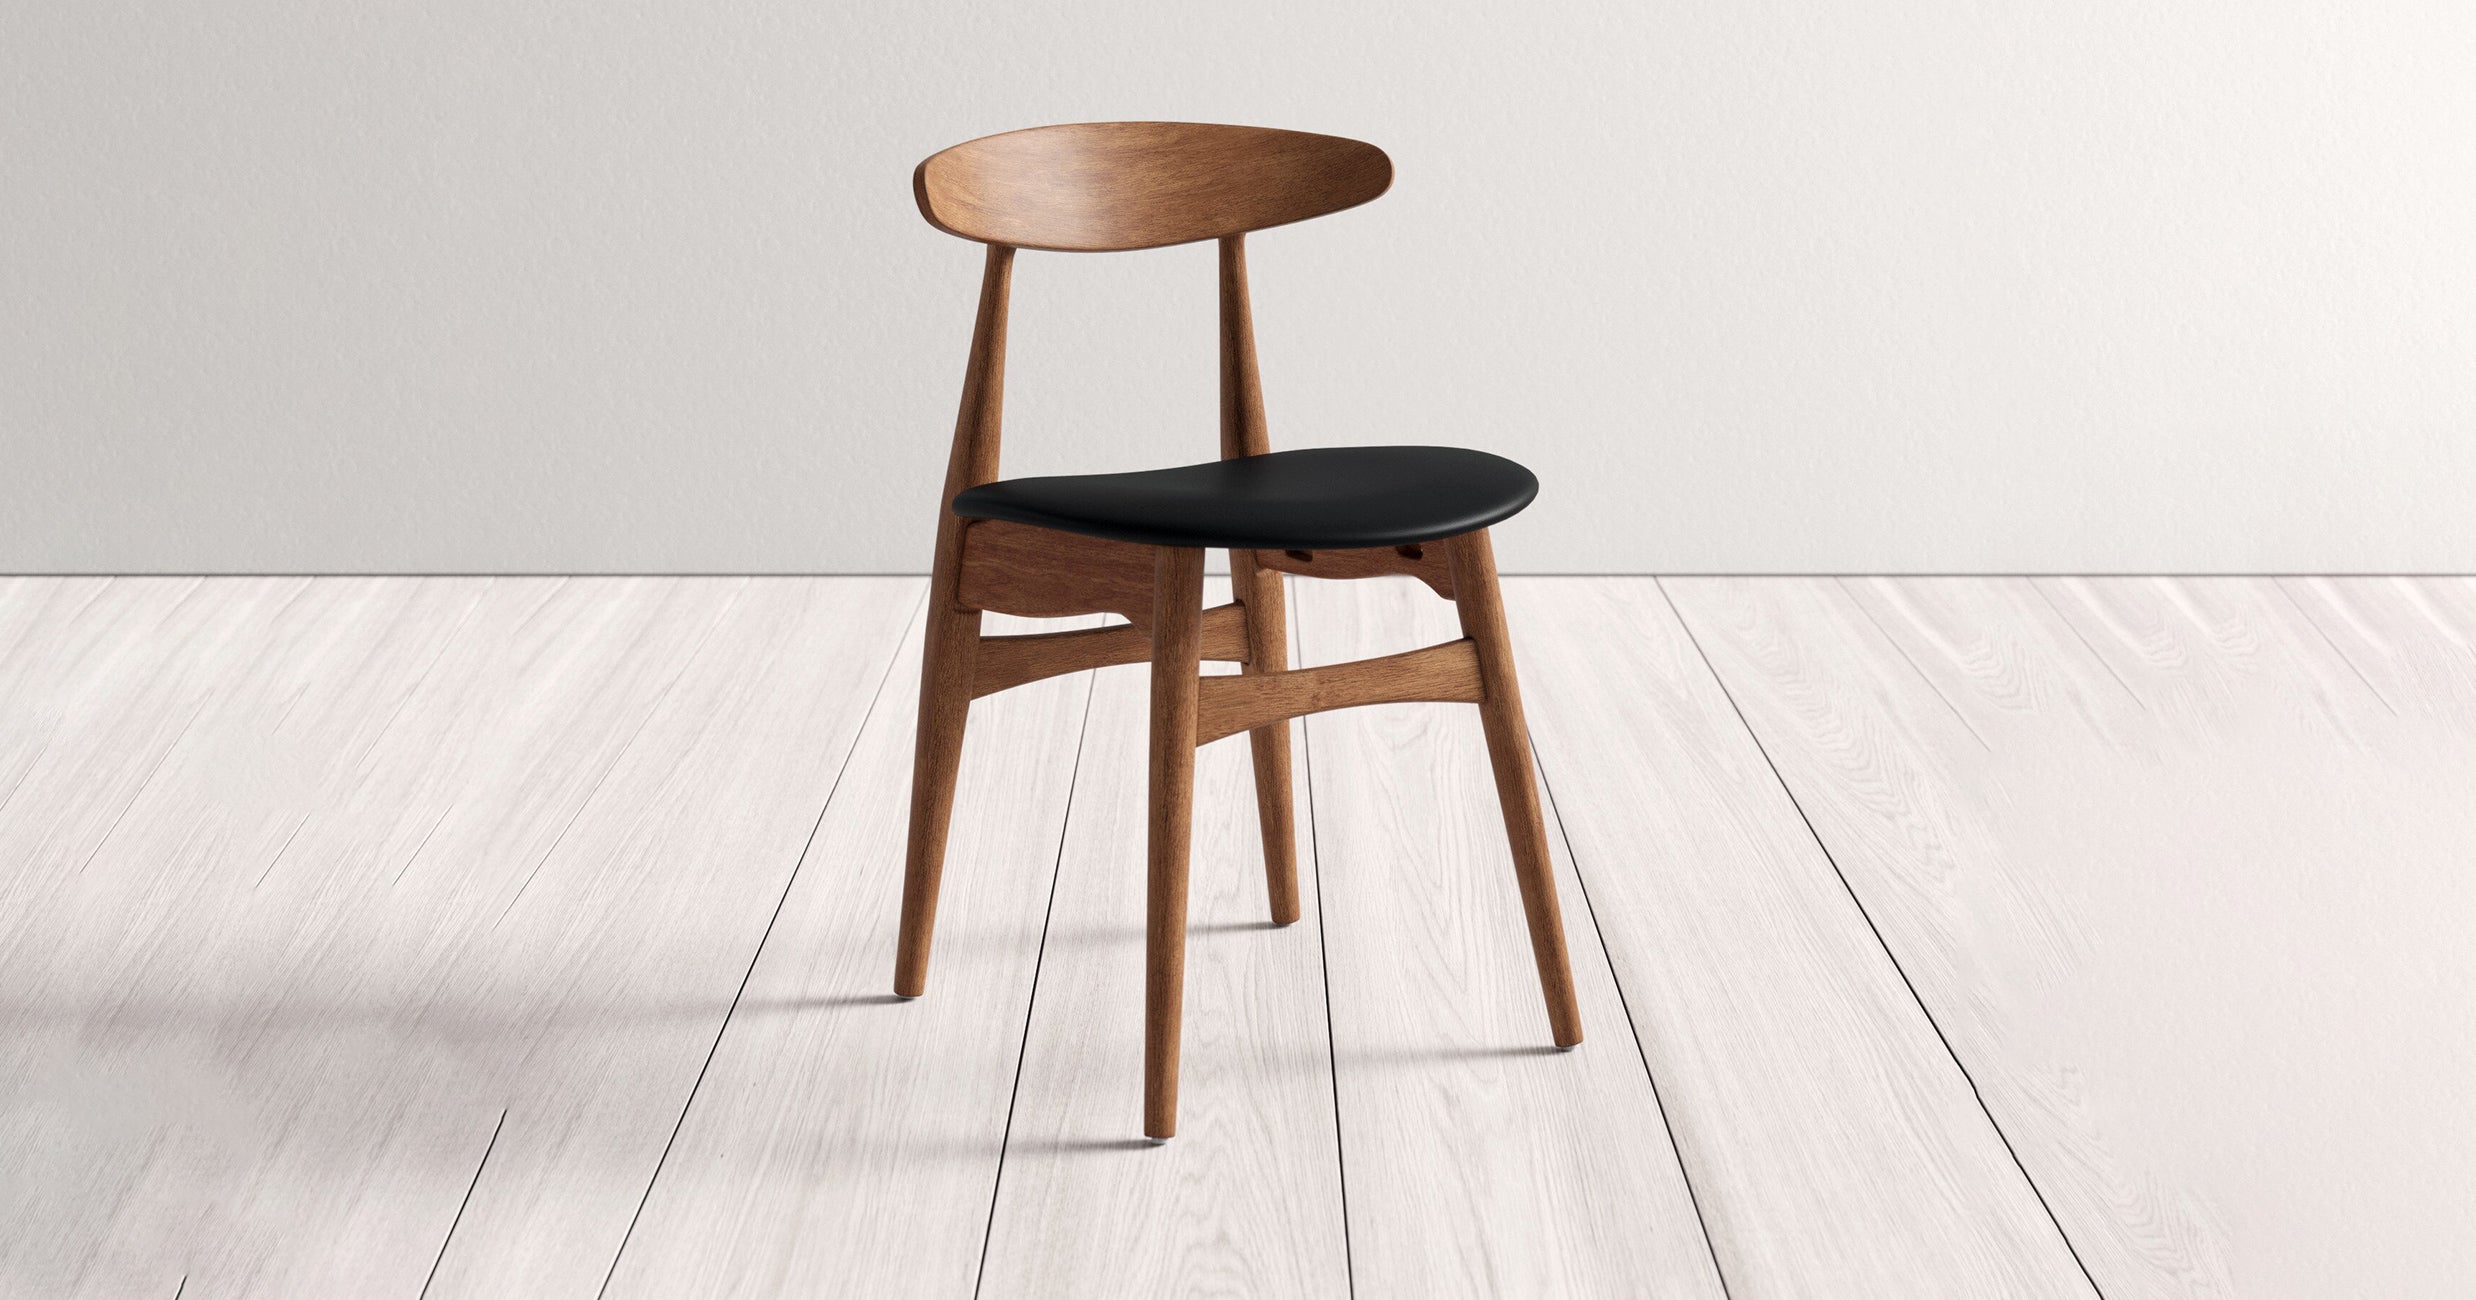 9 Best Dining Chairs 2021, What Are The Most Comfortable Kitchen Chairs